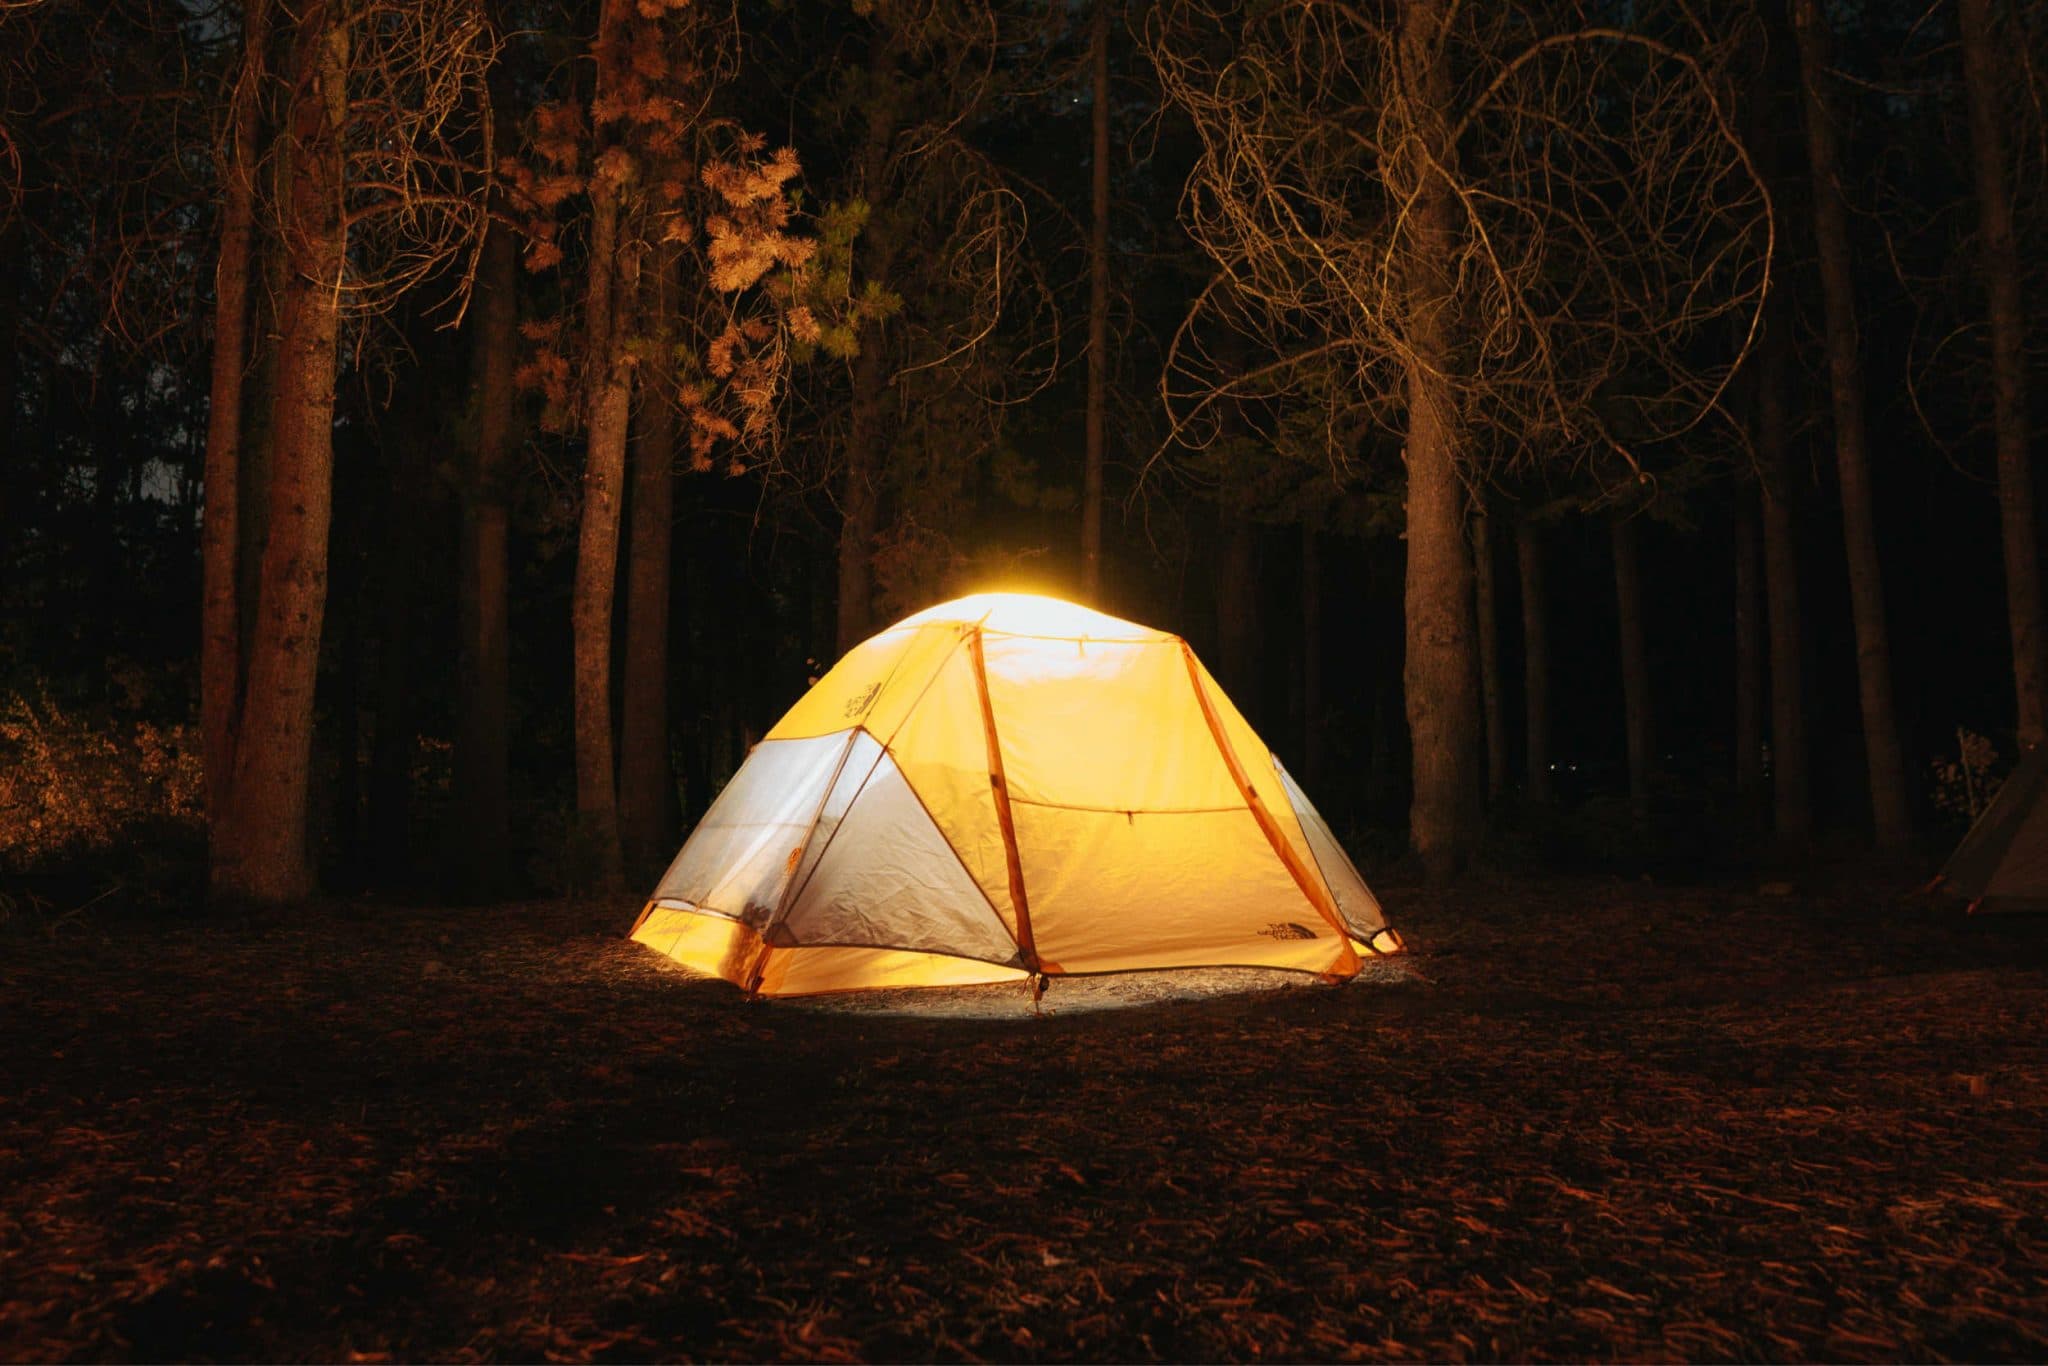 Tent in the woods at night